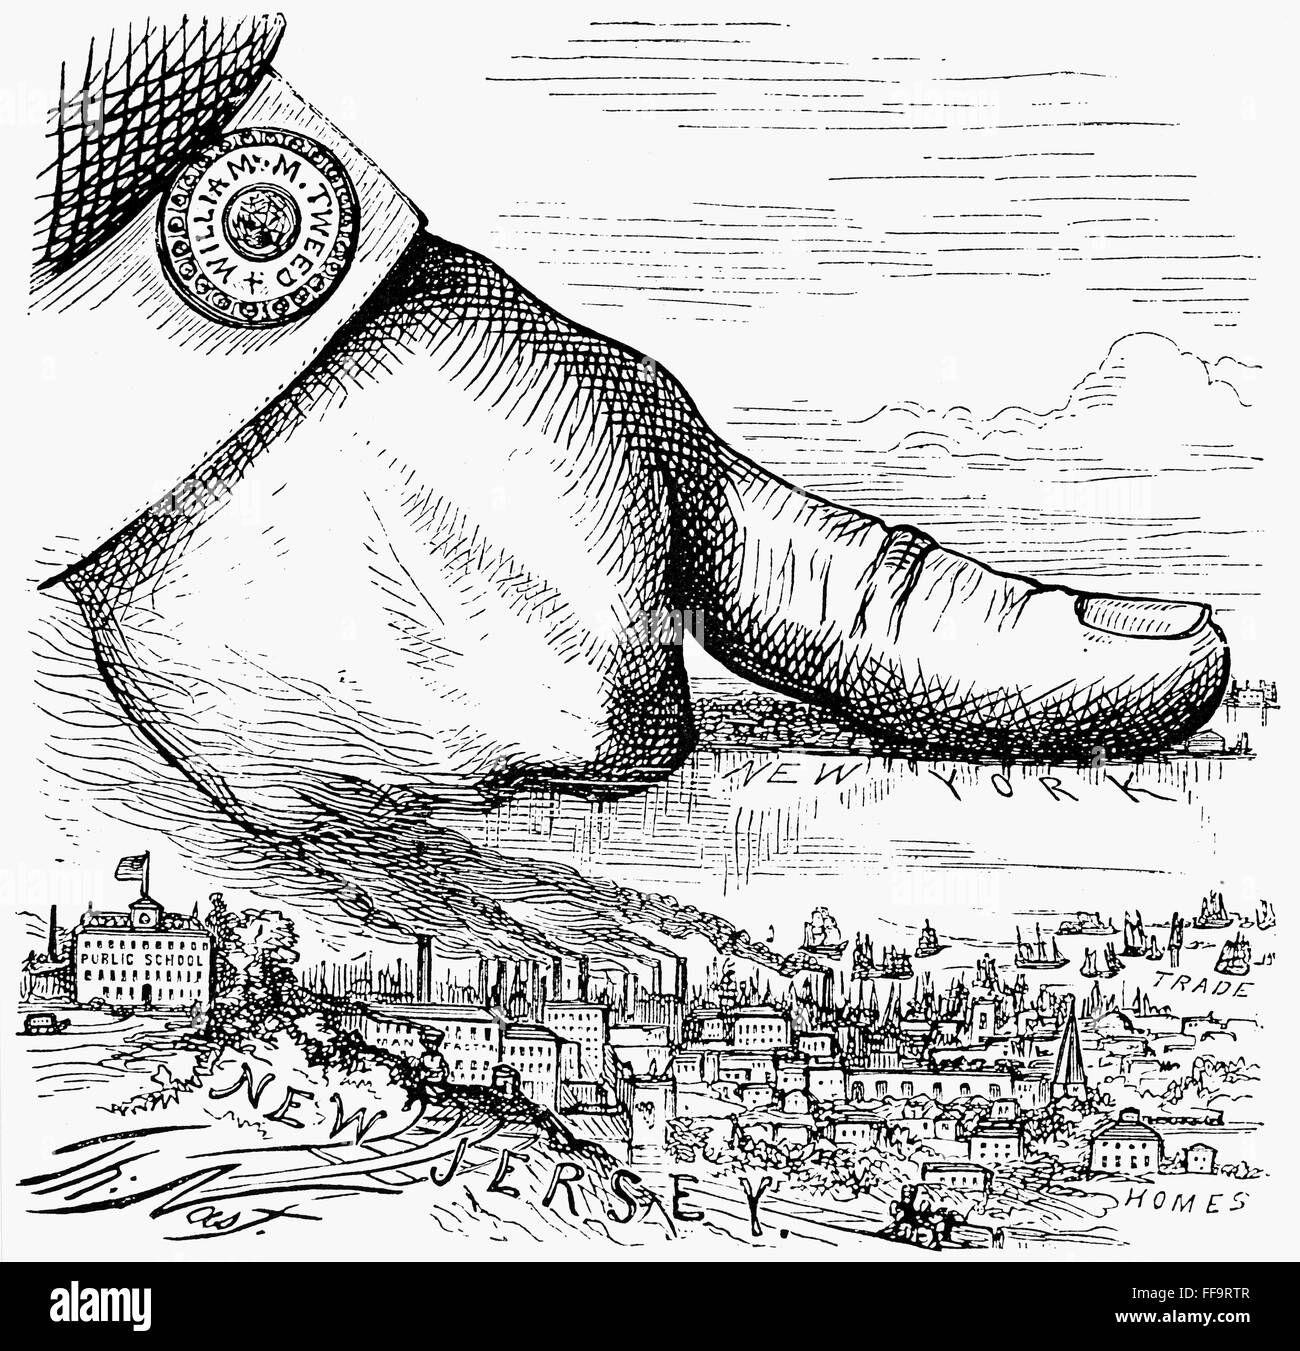 NAST: TWEED RING CARTOON. /nOne of Thomas Nast's vitriolic attacks on William M. 'Boss' Tweed and the Tweed Ring published shortly before the New York state and municipal elections of 1871. Stock Photo